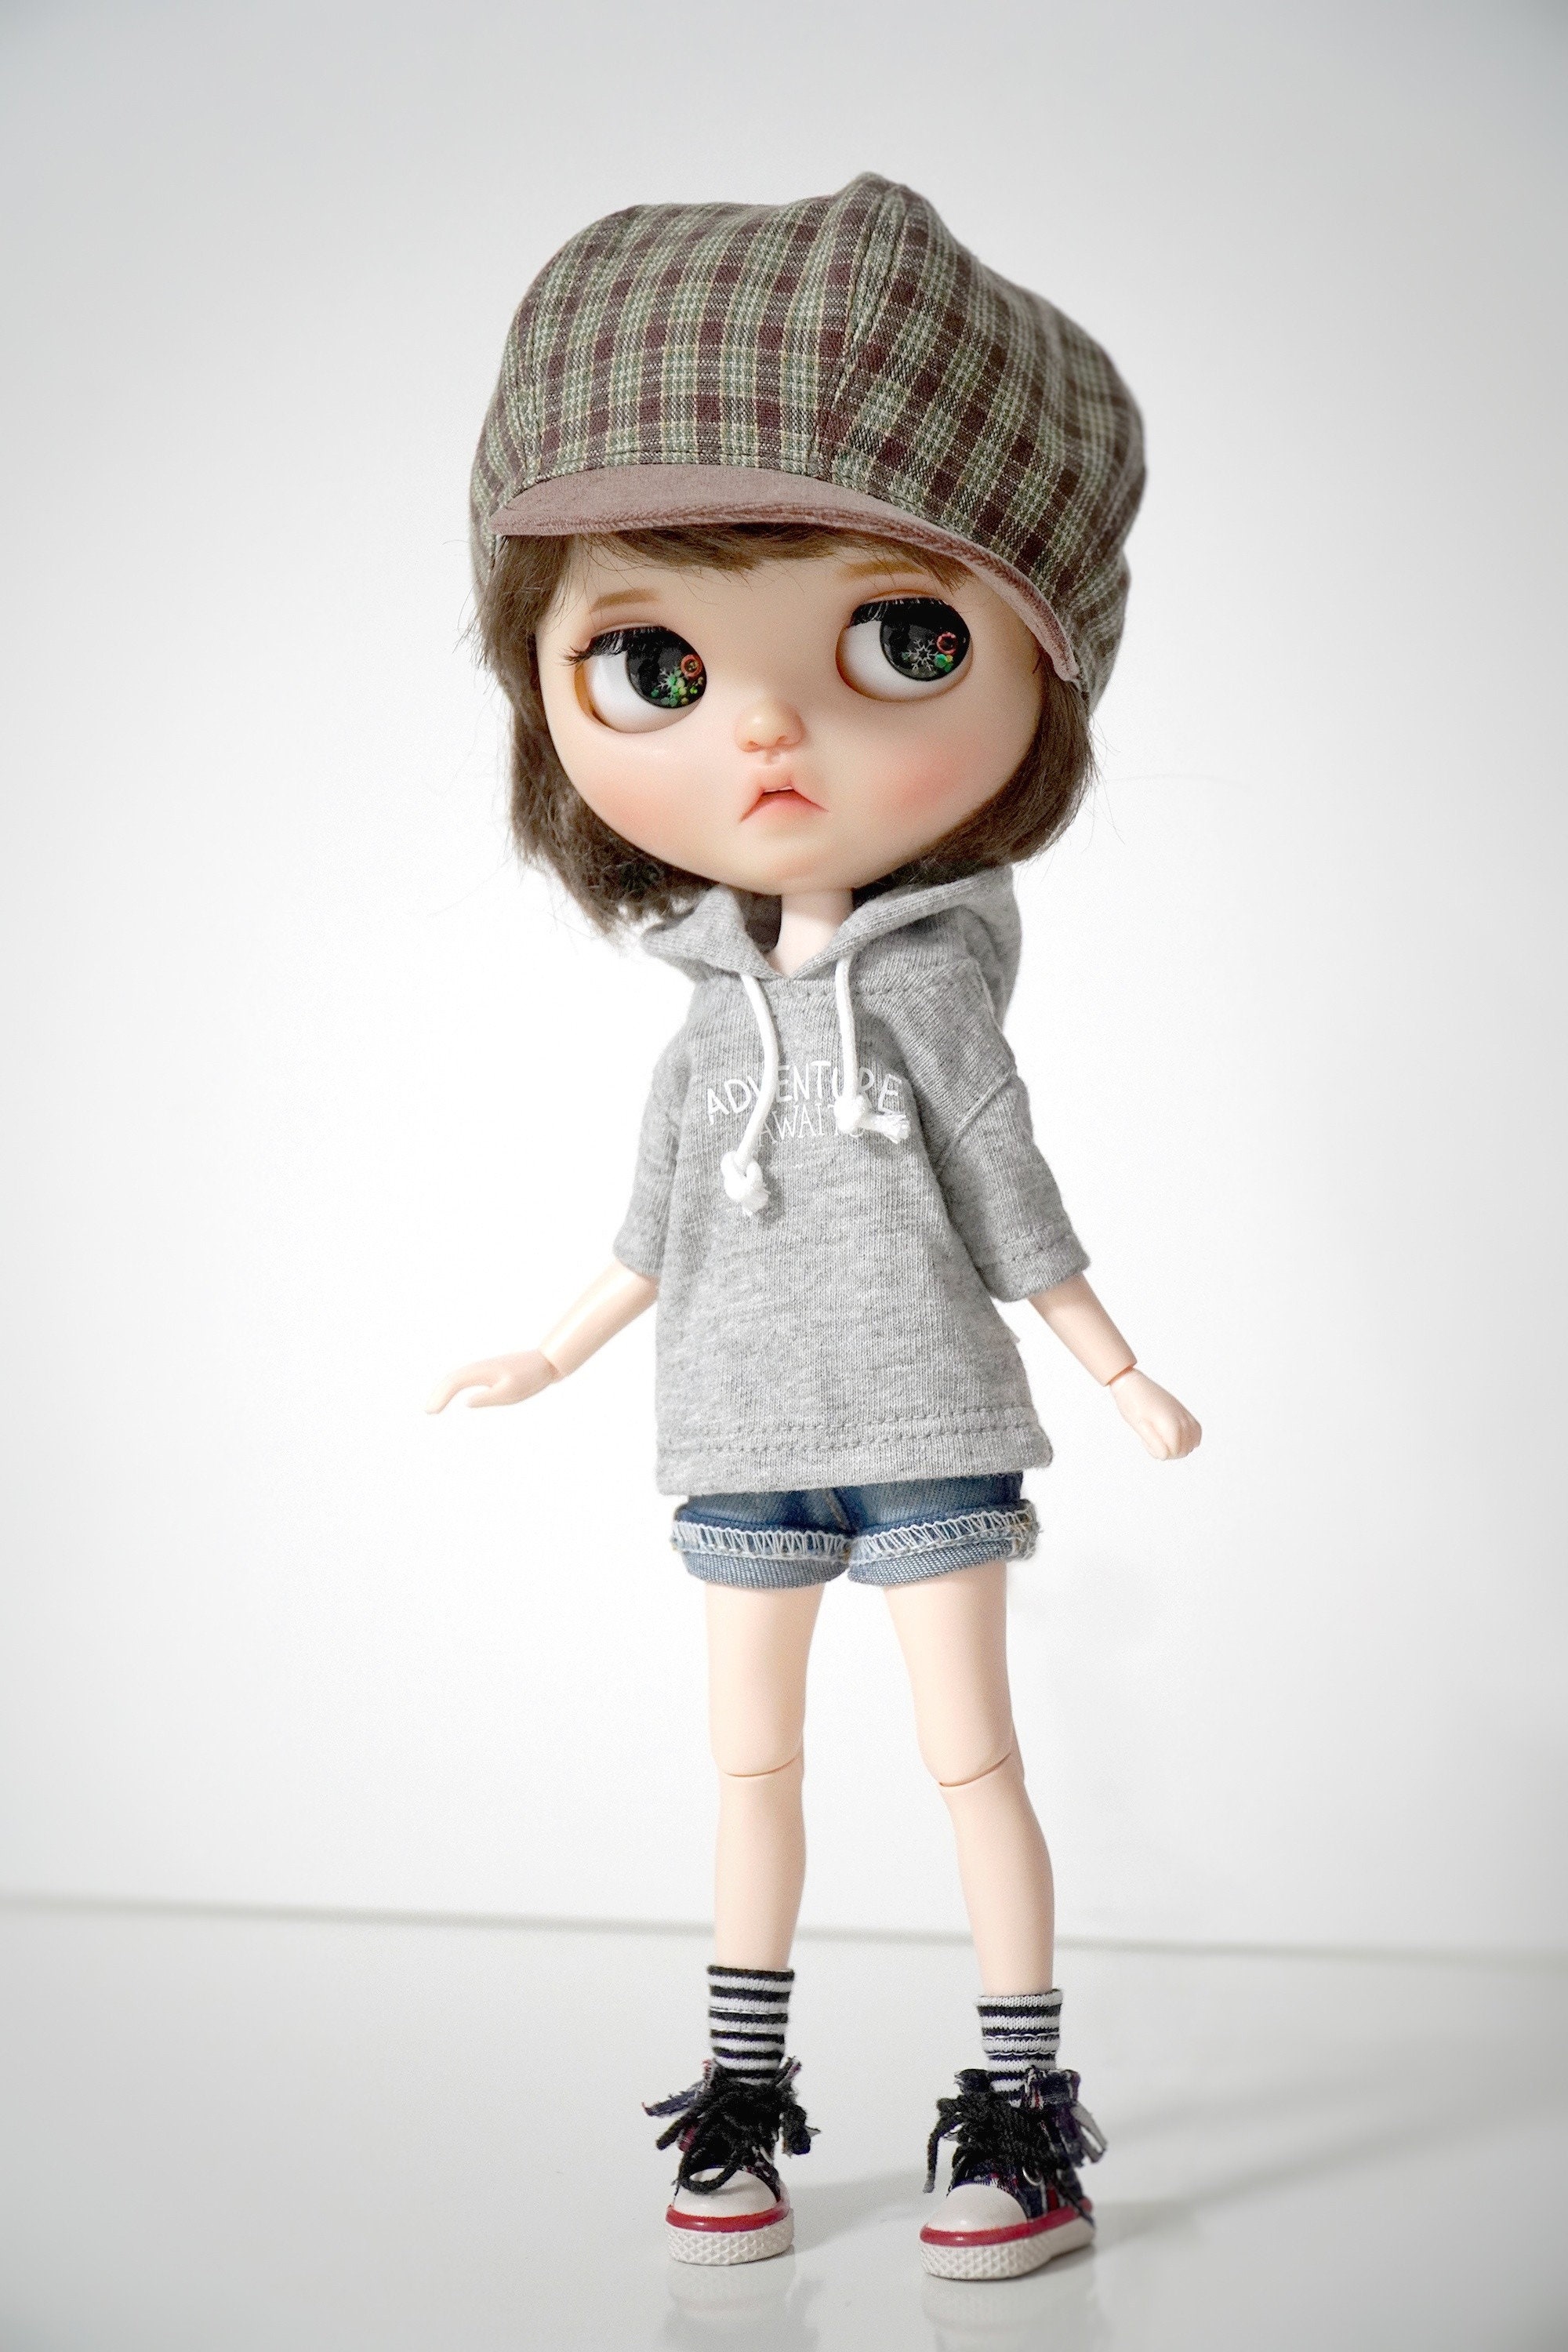 Blythe Pullip doll Clothes Adventure Gray Hoodie T-shirt | Etsy